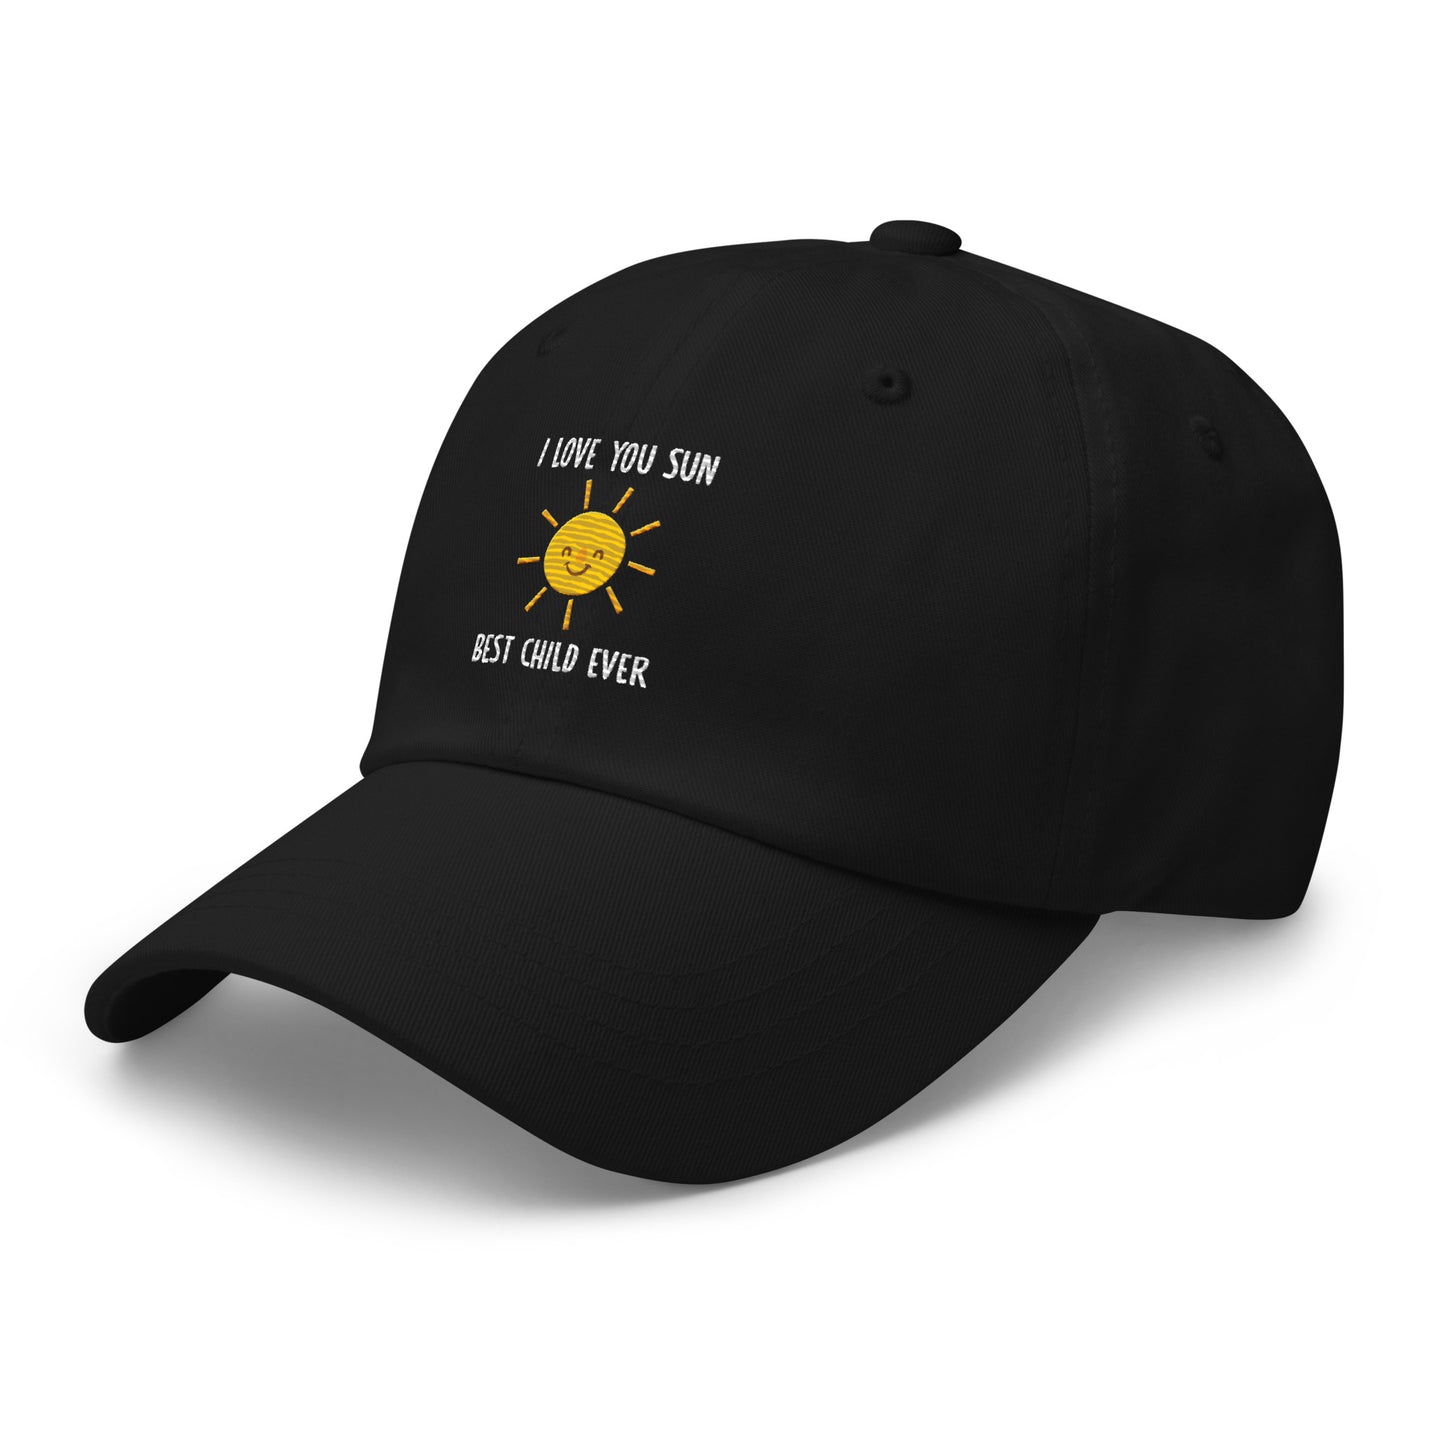 I Love You Sun Best Child Ever Dad hat